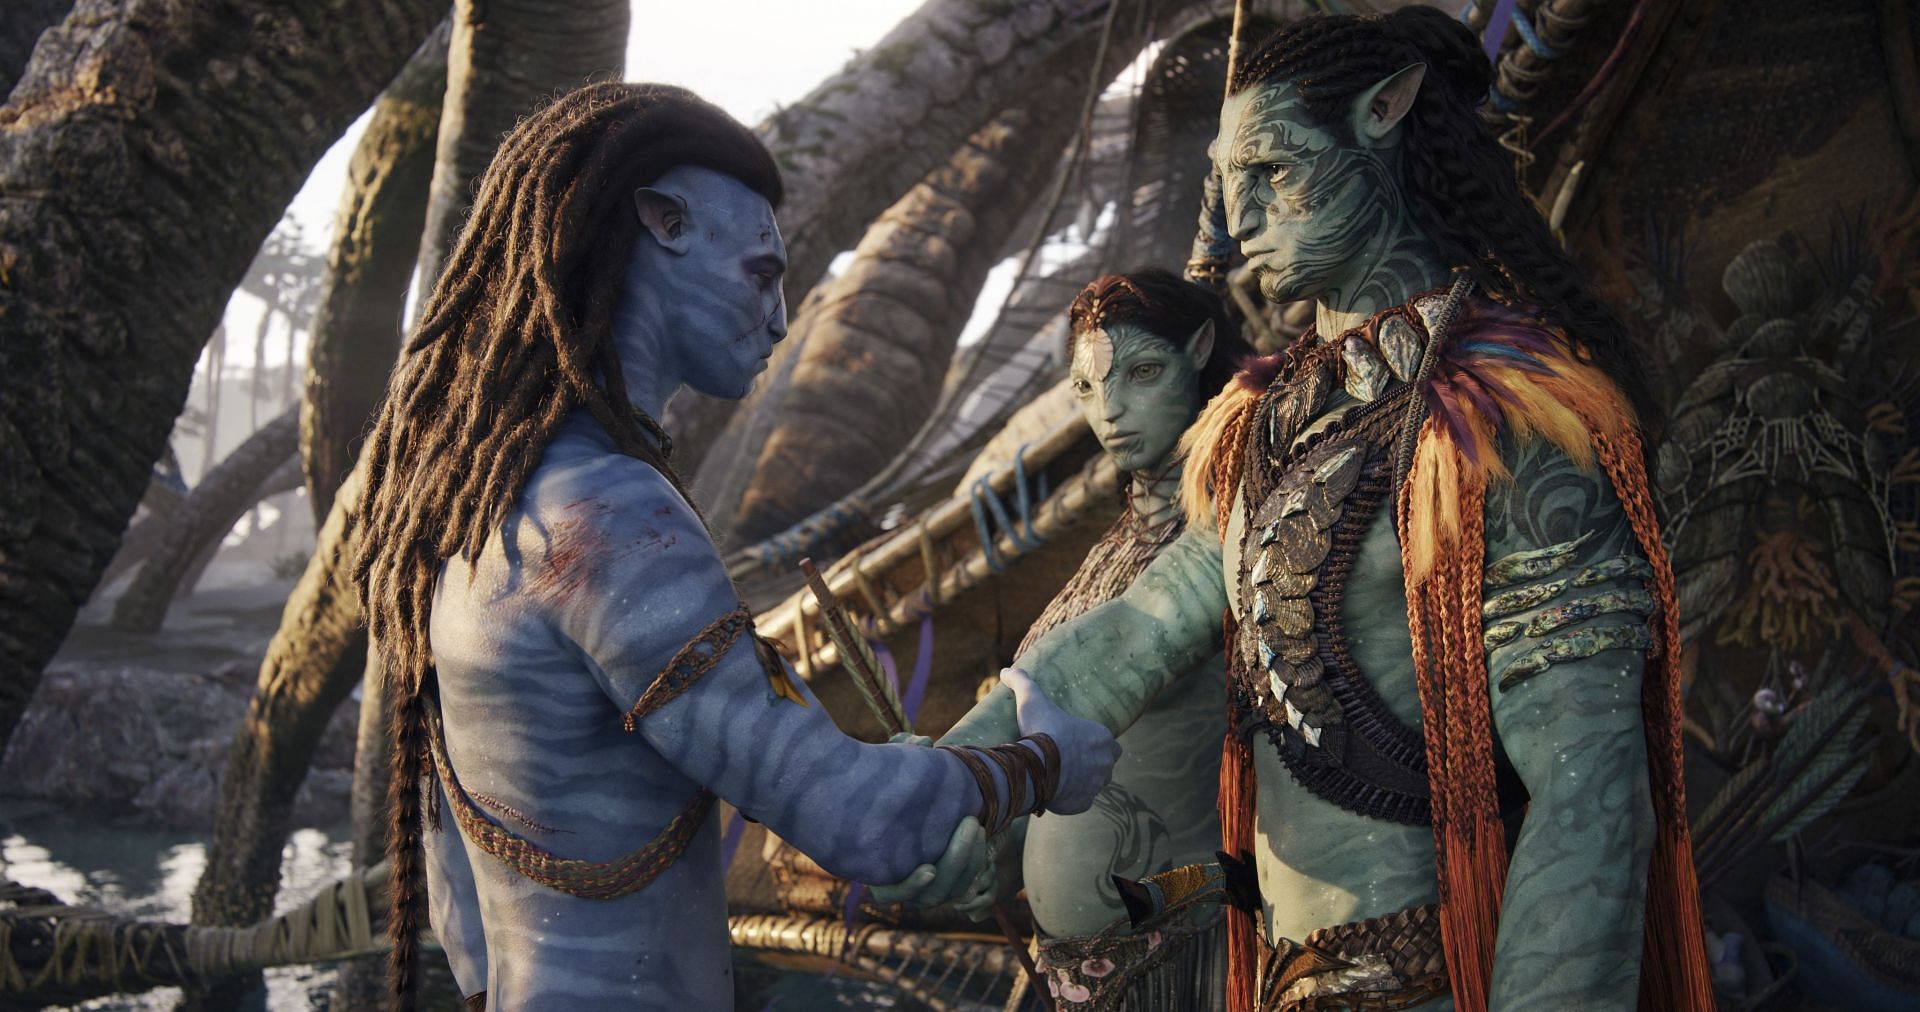 With James Cameron and his team behind it, fans can expect the fourth installment of Avatar to be another groundbreaking cinematic experience that will leave them breathless (Image via Disney)